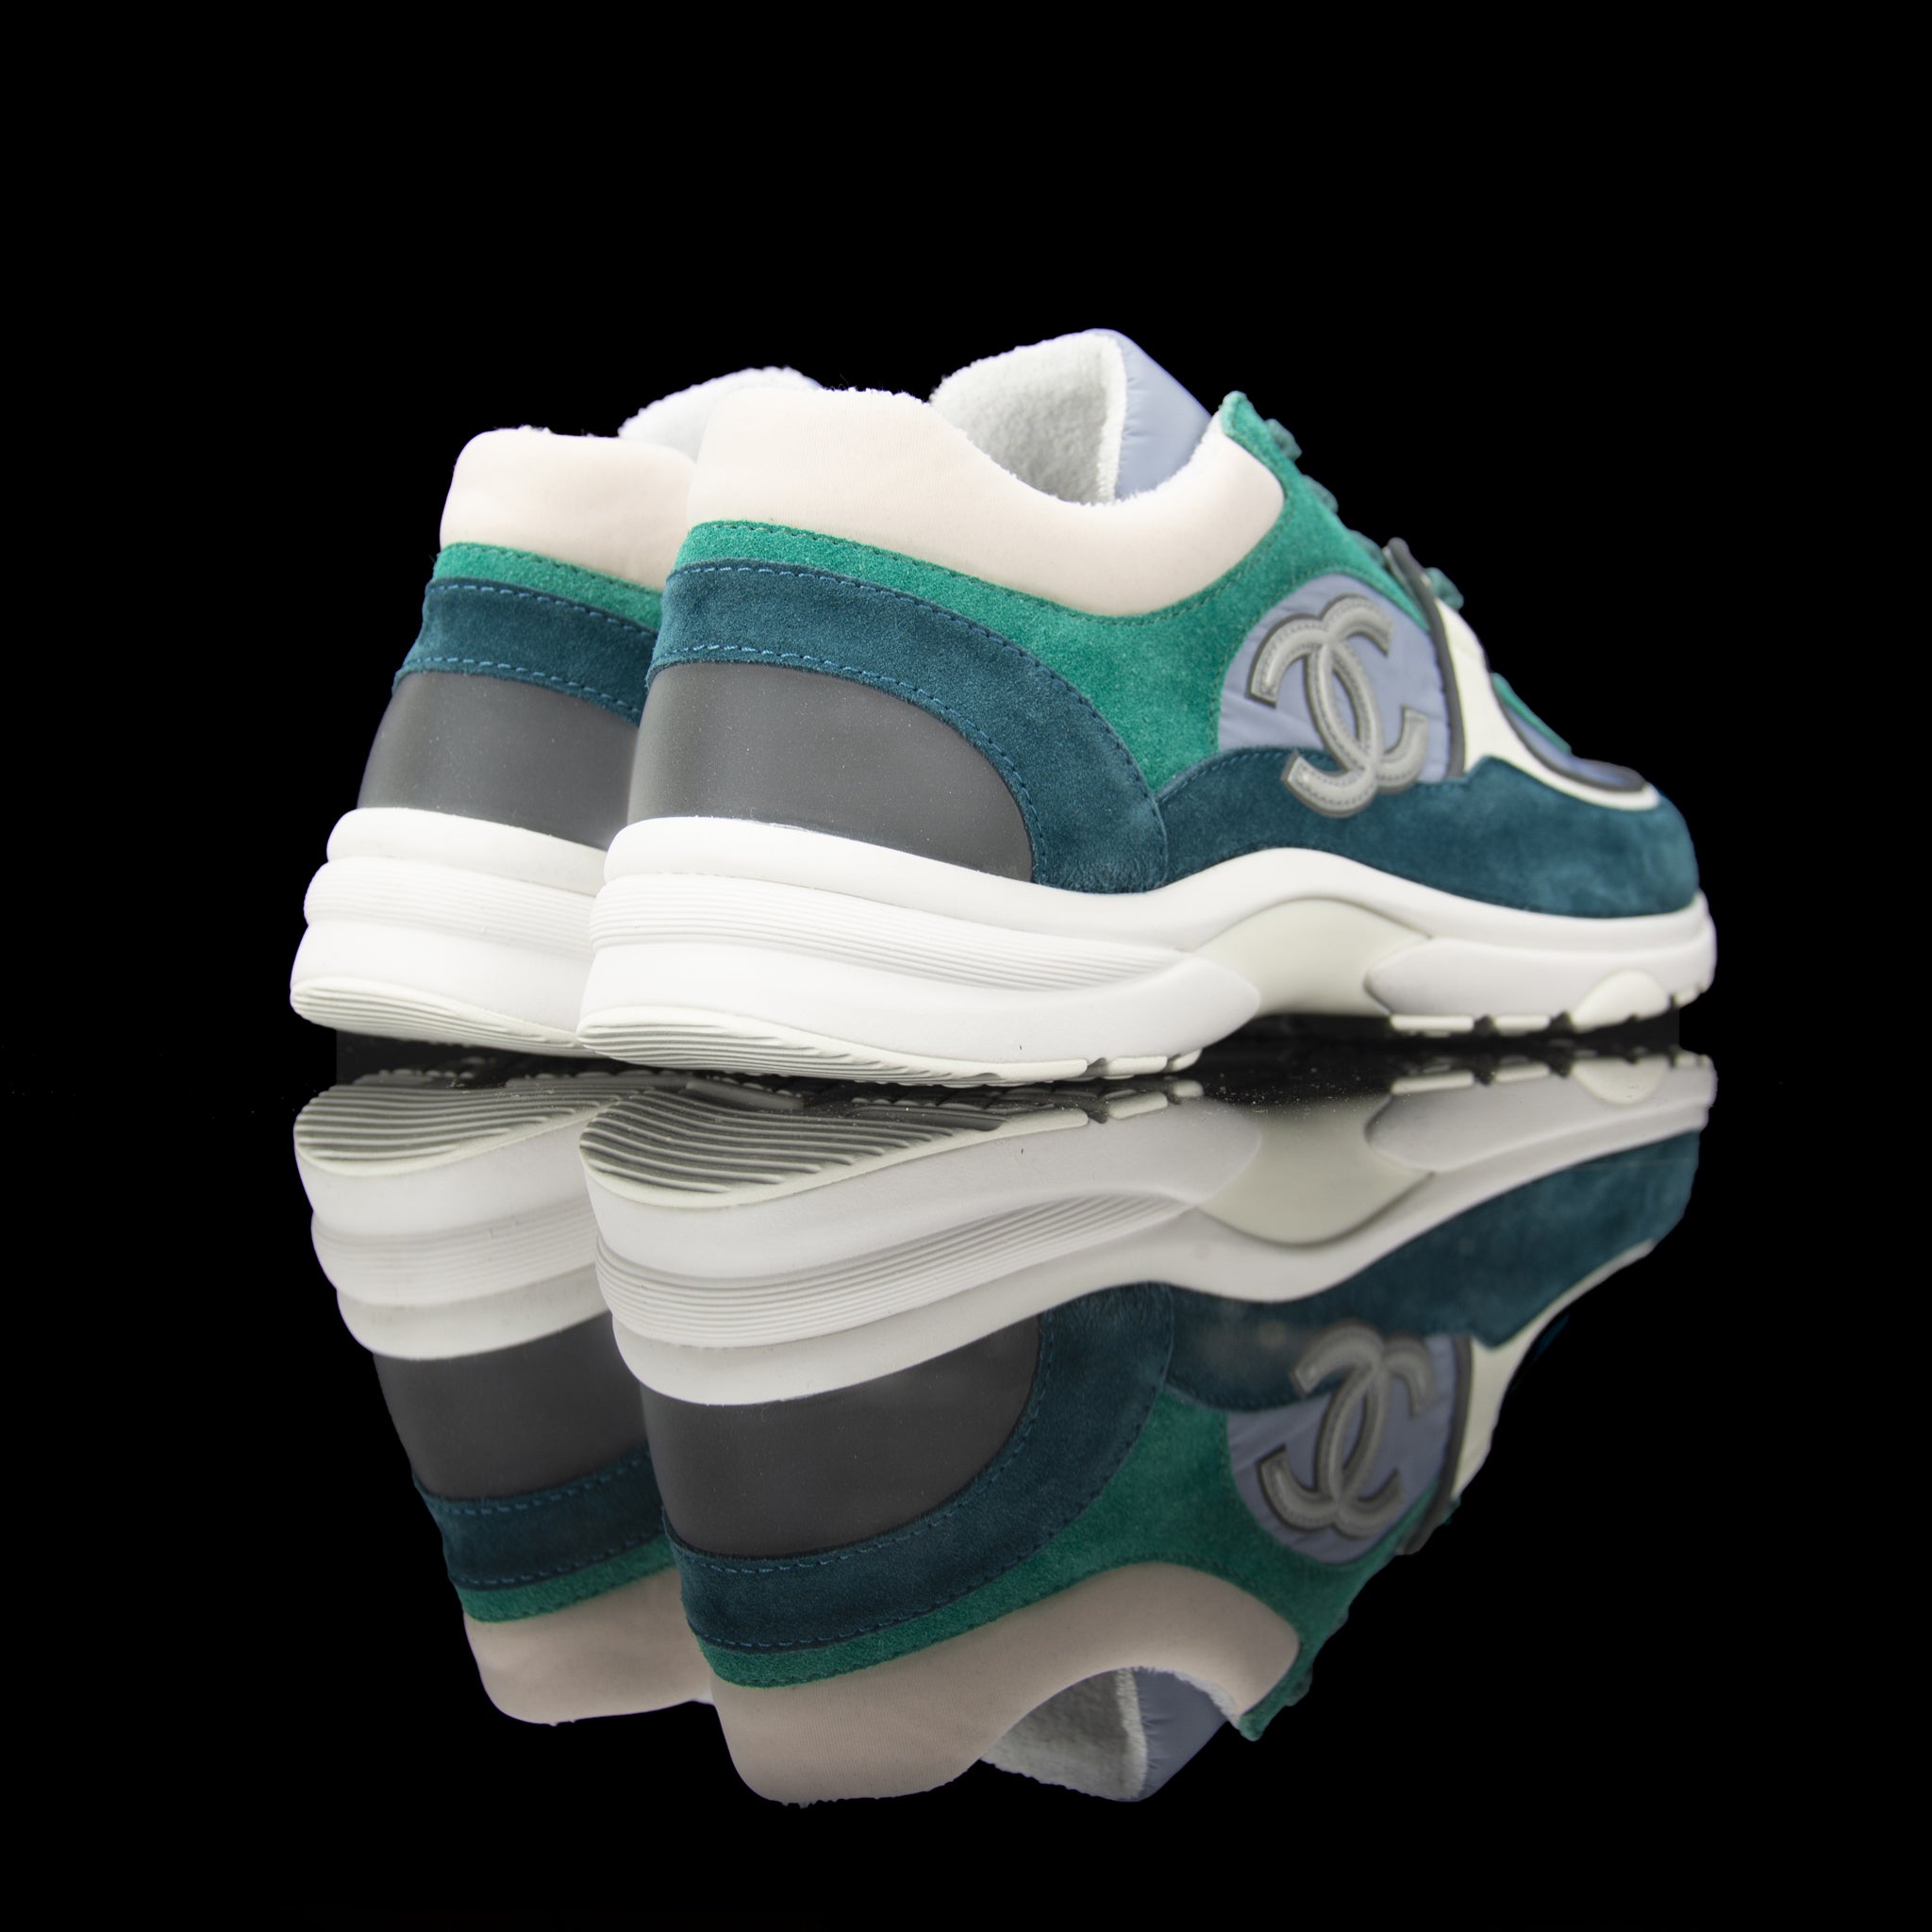 Chanel-CC Sneakers-Pre Order Duration (3-5 Working Days) CC Logo on side Grey Reflective 3m pipping and back Grey Green Release: 2019 Limited Release Suede Nylon 3m-fabriqe.com